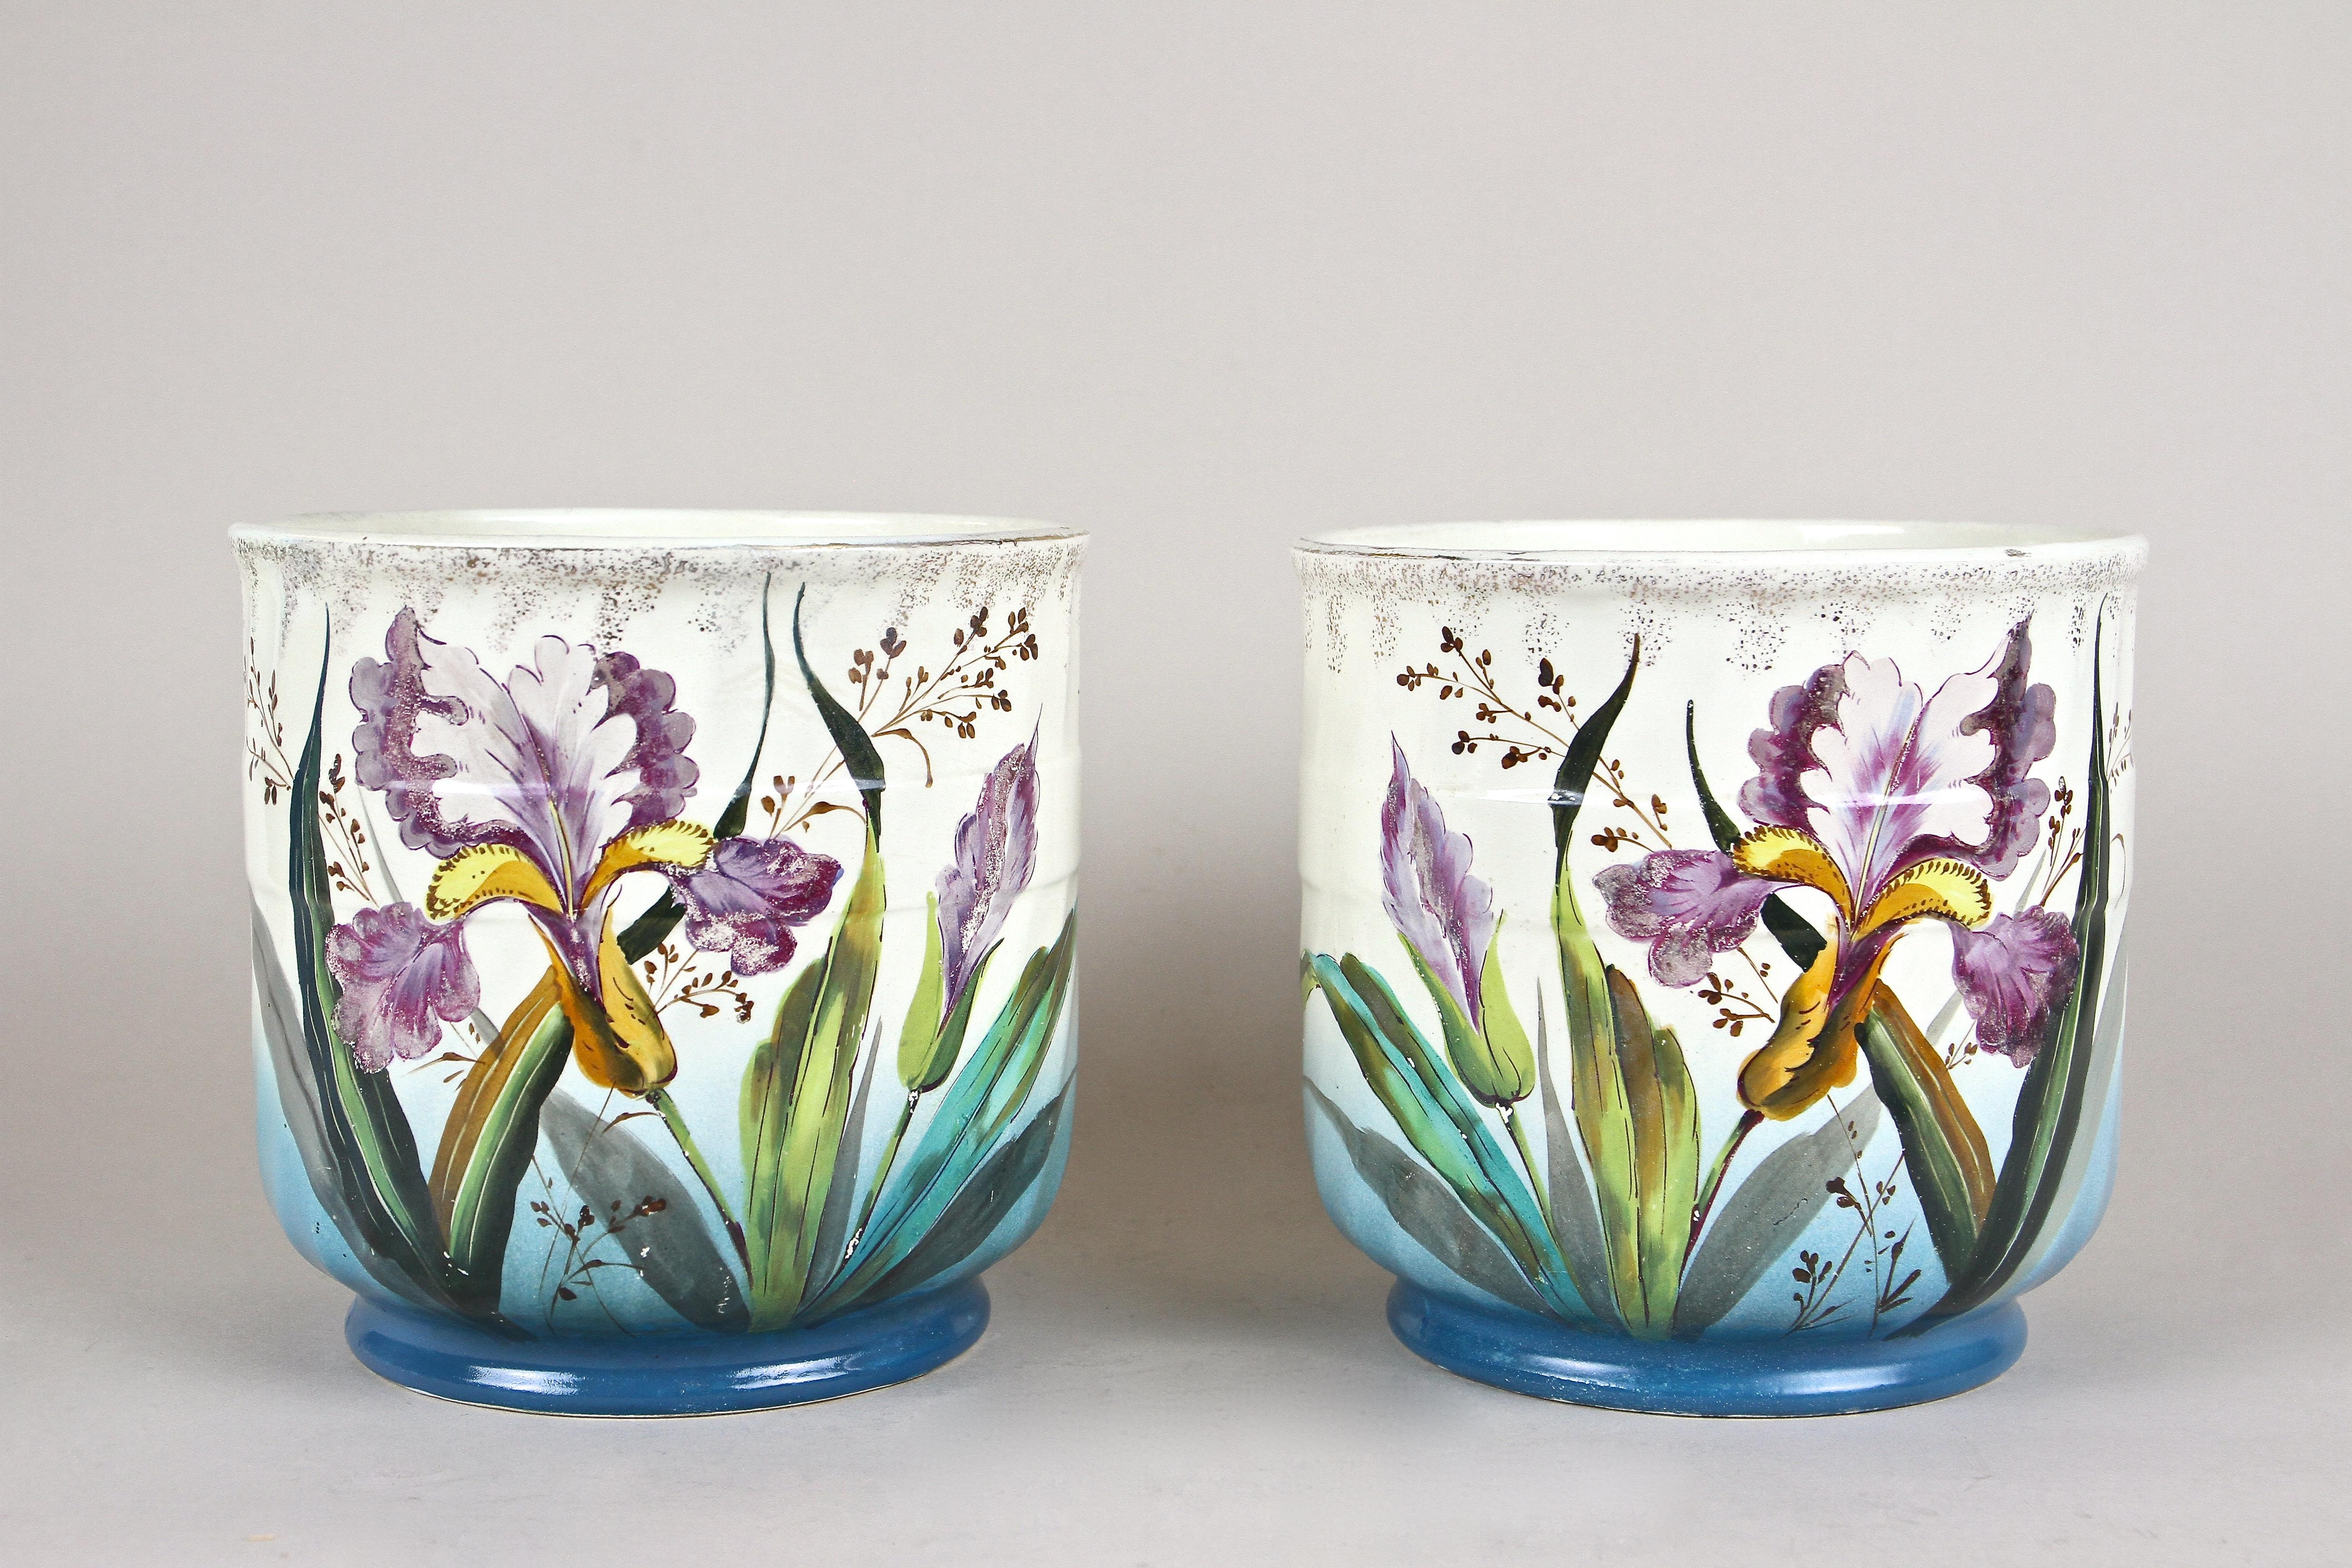 Beautifully painted pair of french Ceramic Cachepots from the early Art Nouveau around 1900. These colorful planters show a great combination of lovely hand painted lilies in fantastic purple, yellow and green tones and a blue so-called 